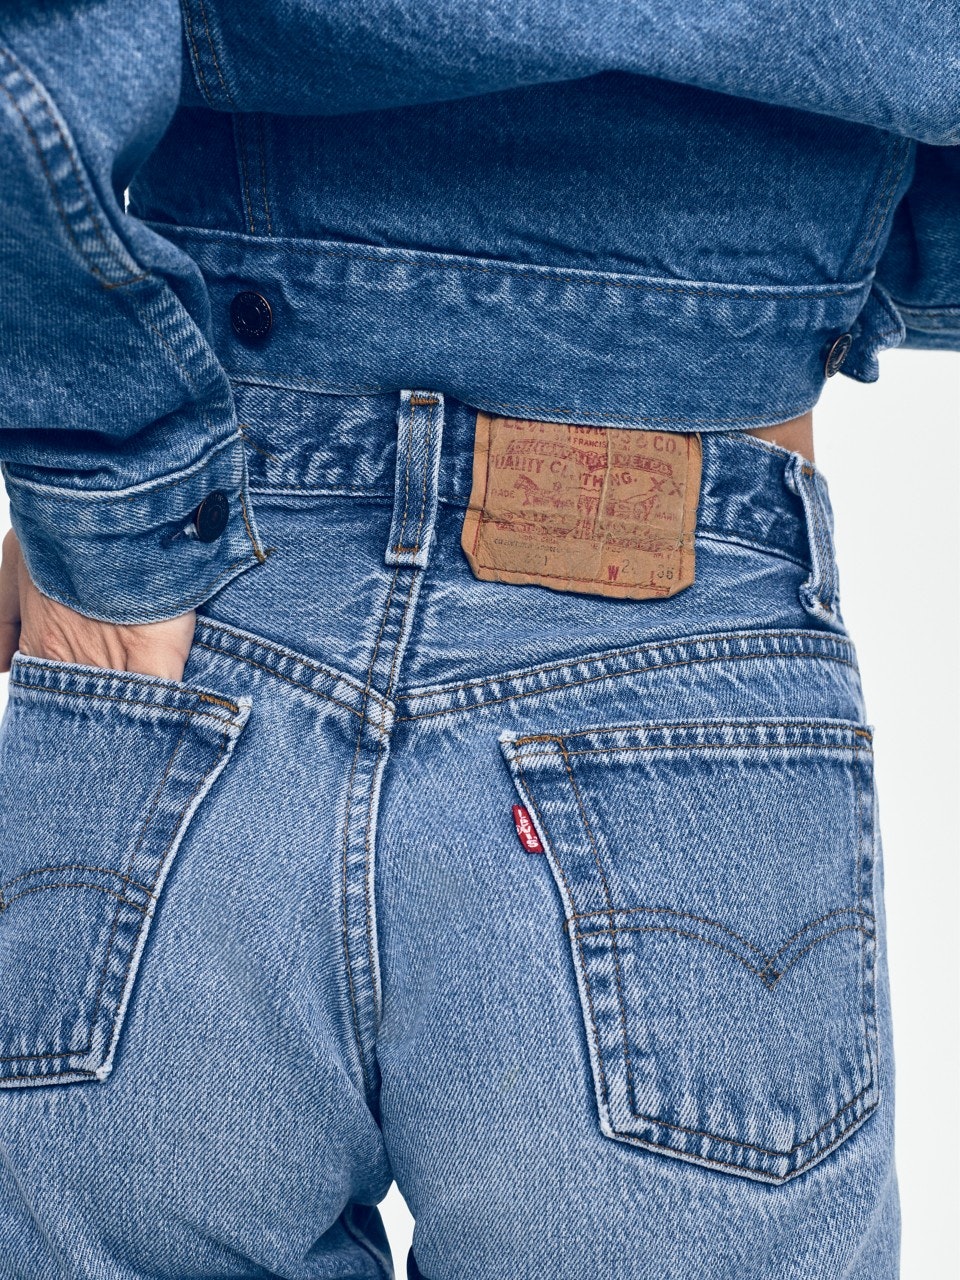 Jcpenney Levis Wholesale Prices, Save 62% 